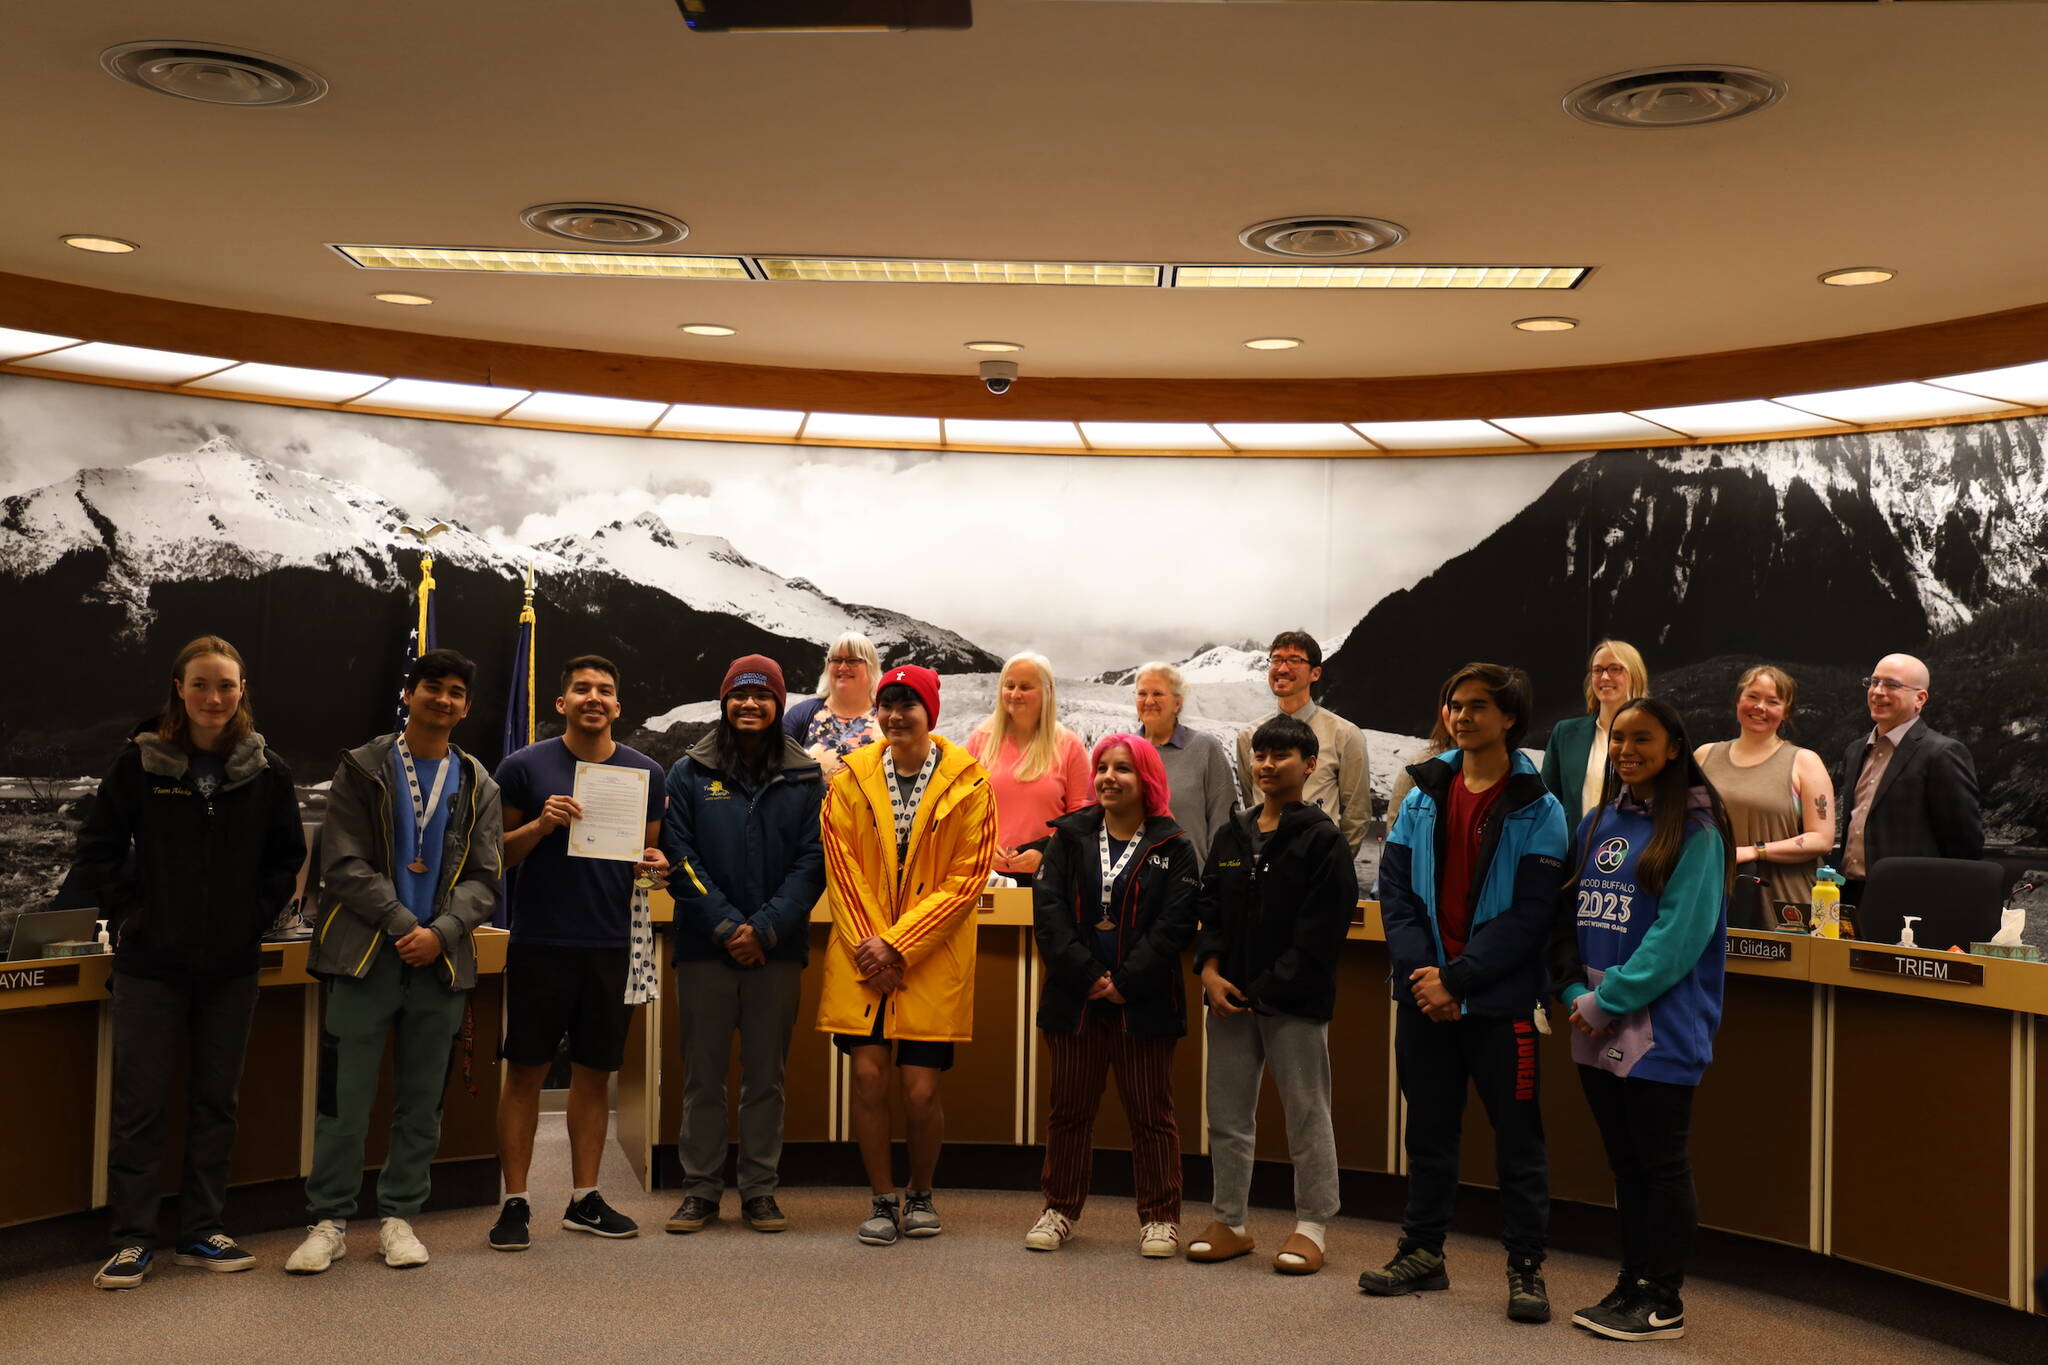 Clarise Larson / Juneau Empire 
From left to right, Minta Schwartz, Matthew Quinto, Kyle Khaayák’w Worl, Ezra Elisoff, Leif Richards, Jordan Bennett, Lyric Ashenfelter, Sonny Mazon and Nathan Blake stand alongside City and Borough of Juneau Assembly members Monday night after being honored for their representation of Juneau for Team Alaska at the 2023 Arctic Winter Games.